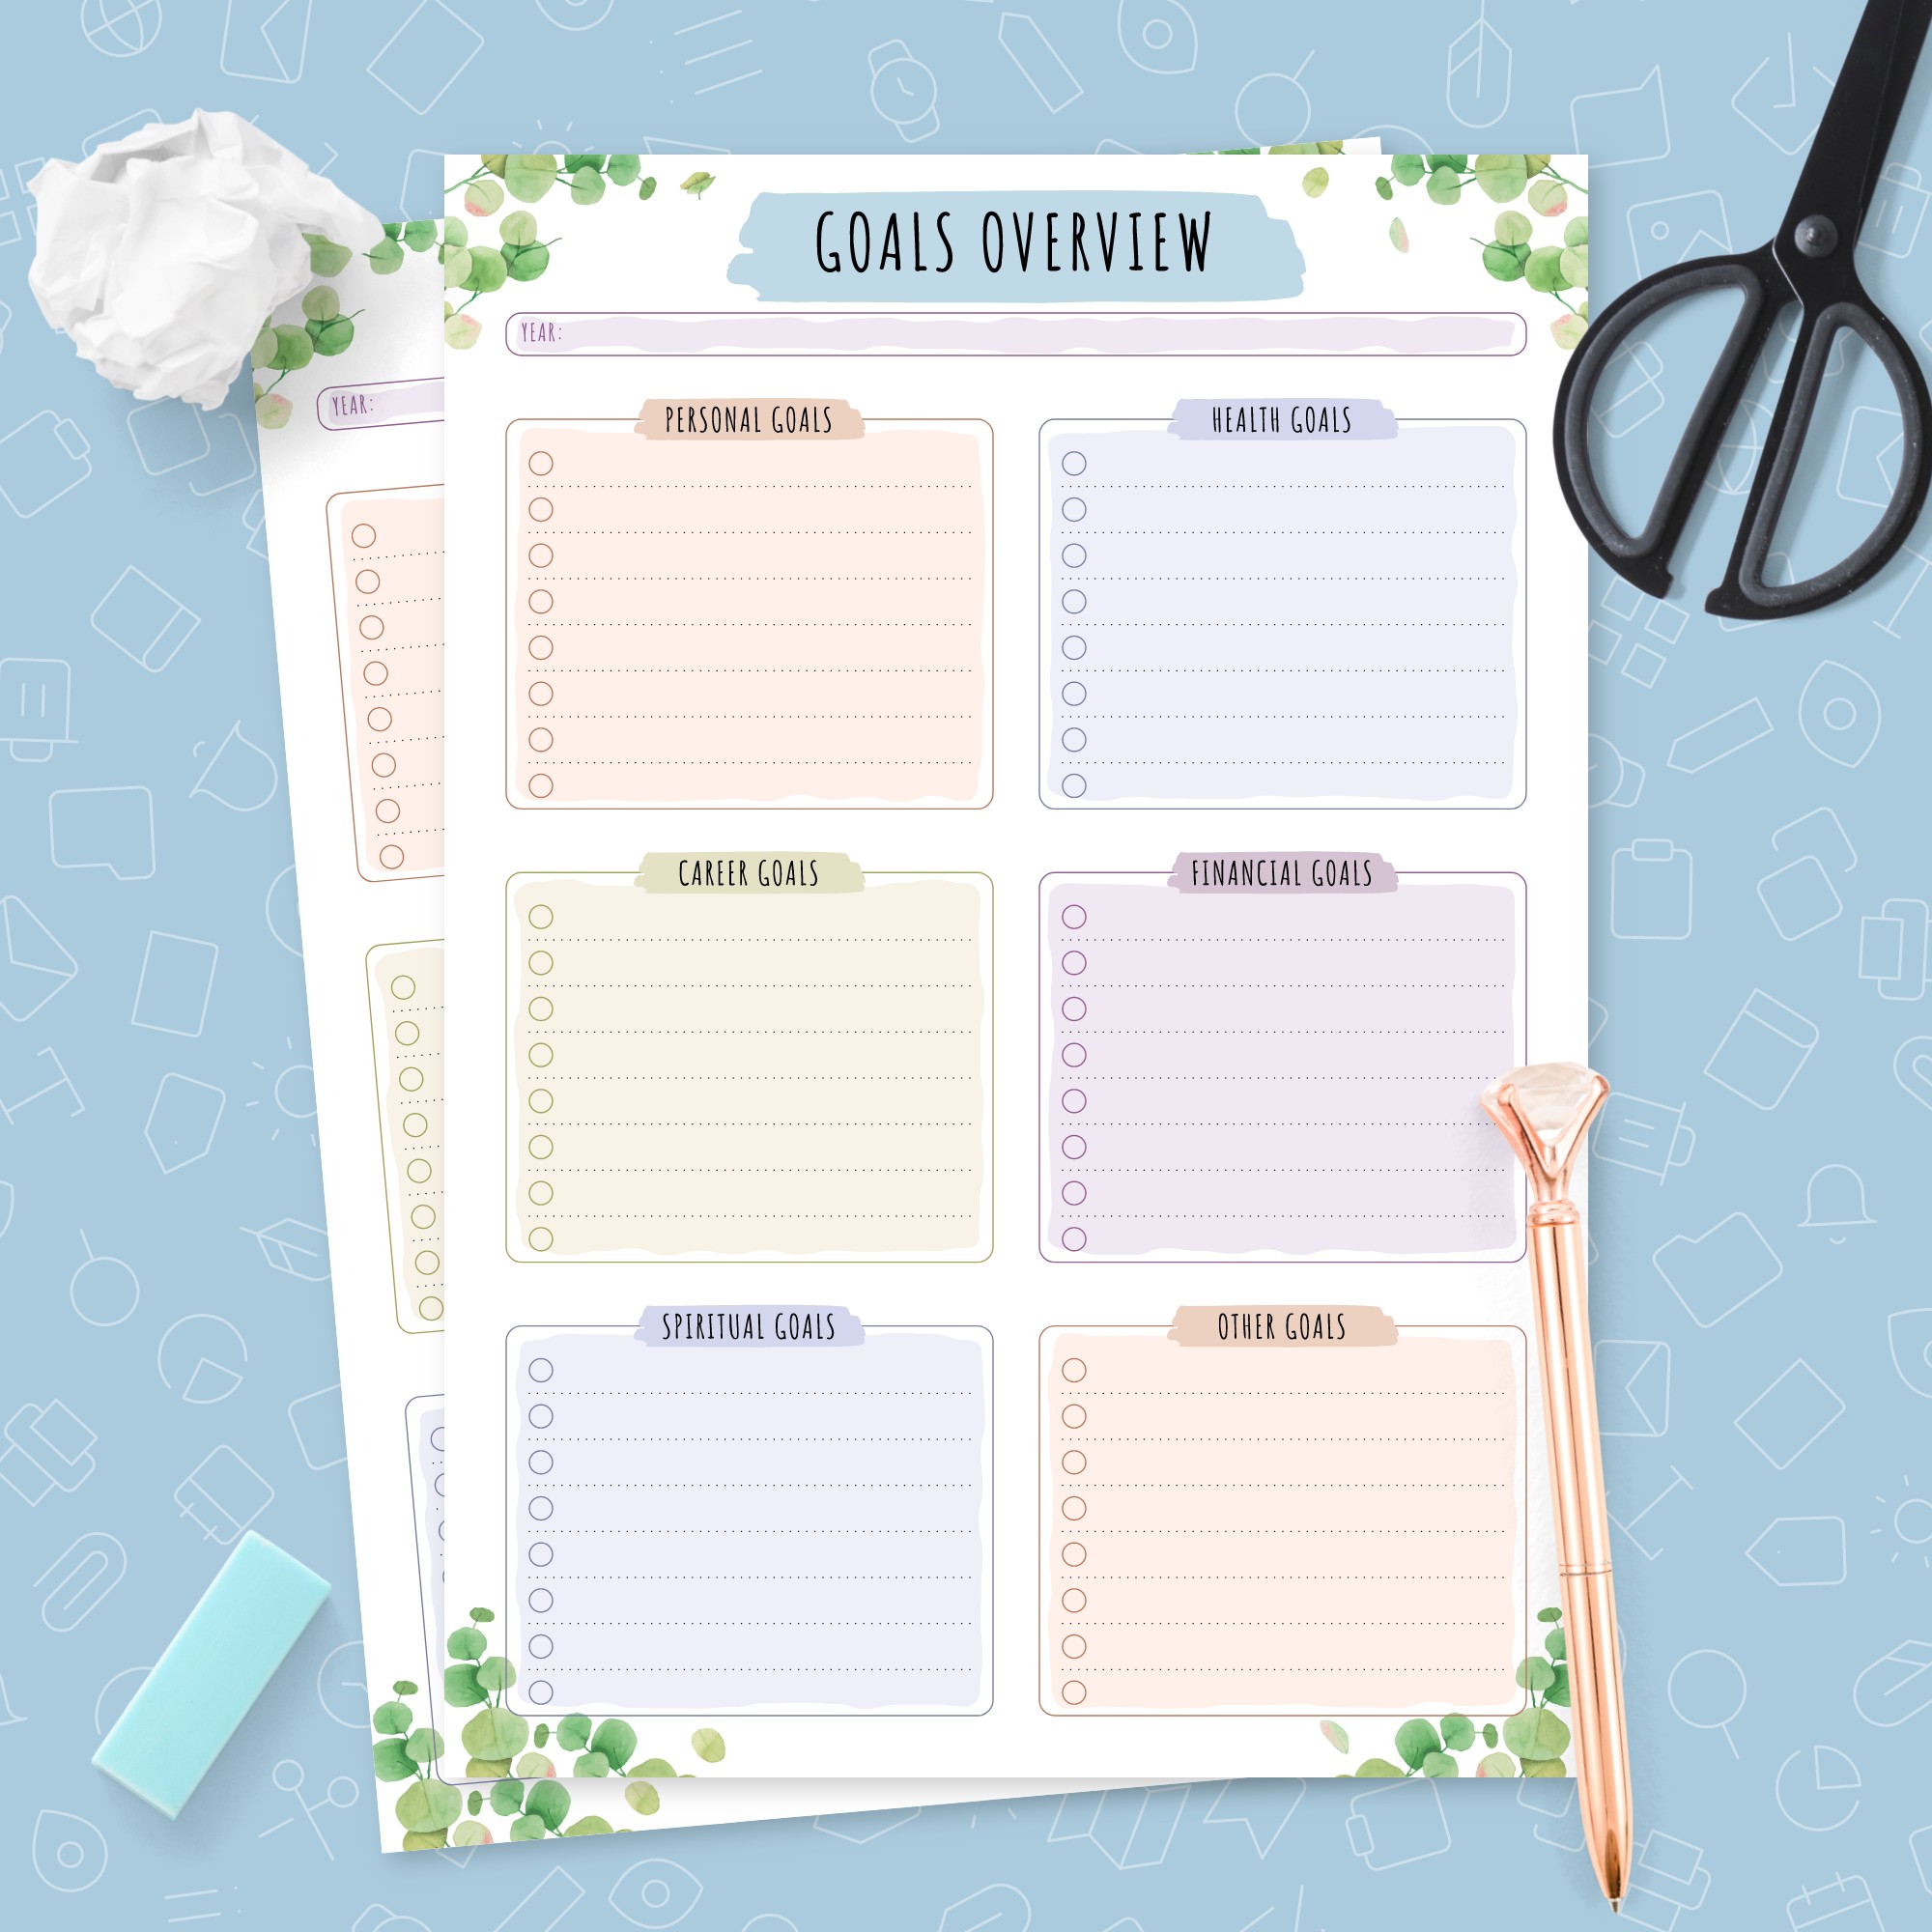 Yearly Goals Overview - Botanical Design Template - Printable PDF